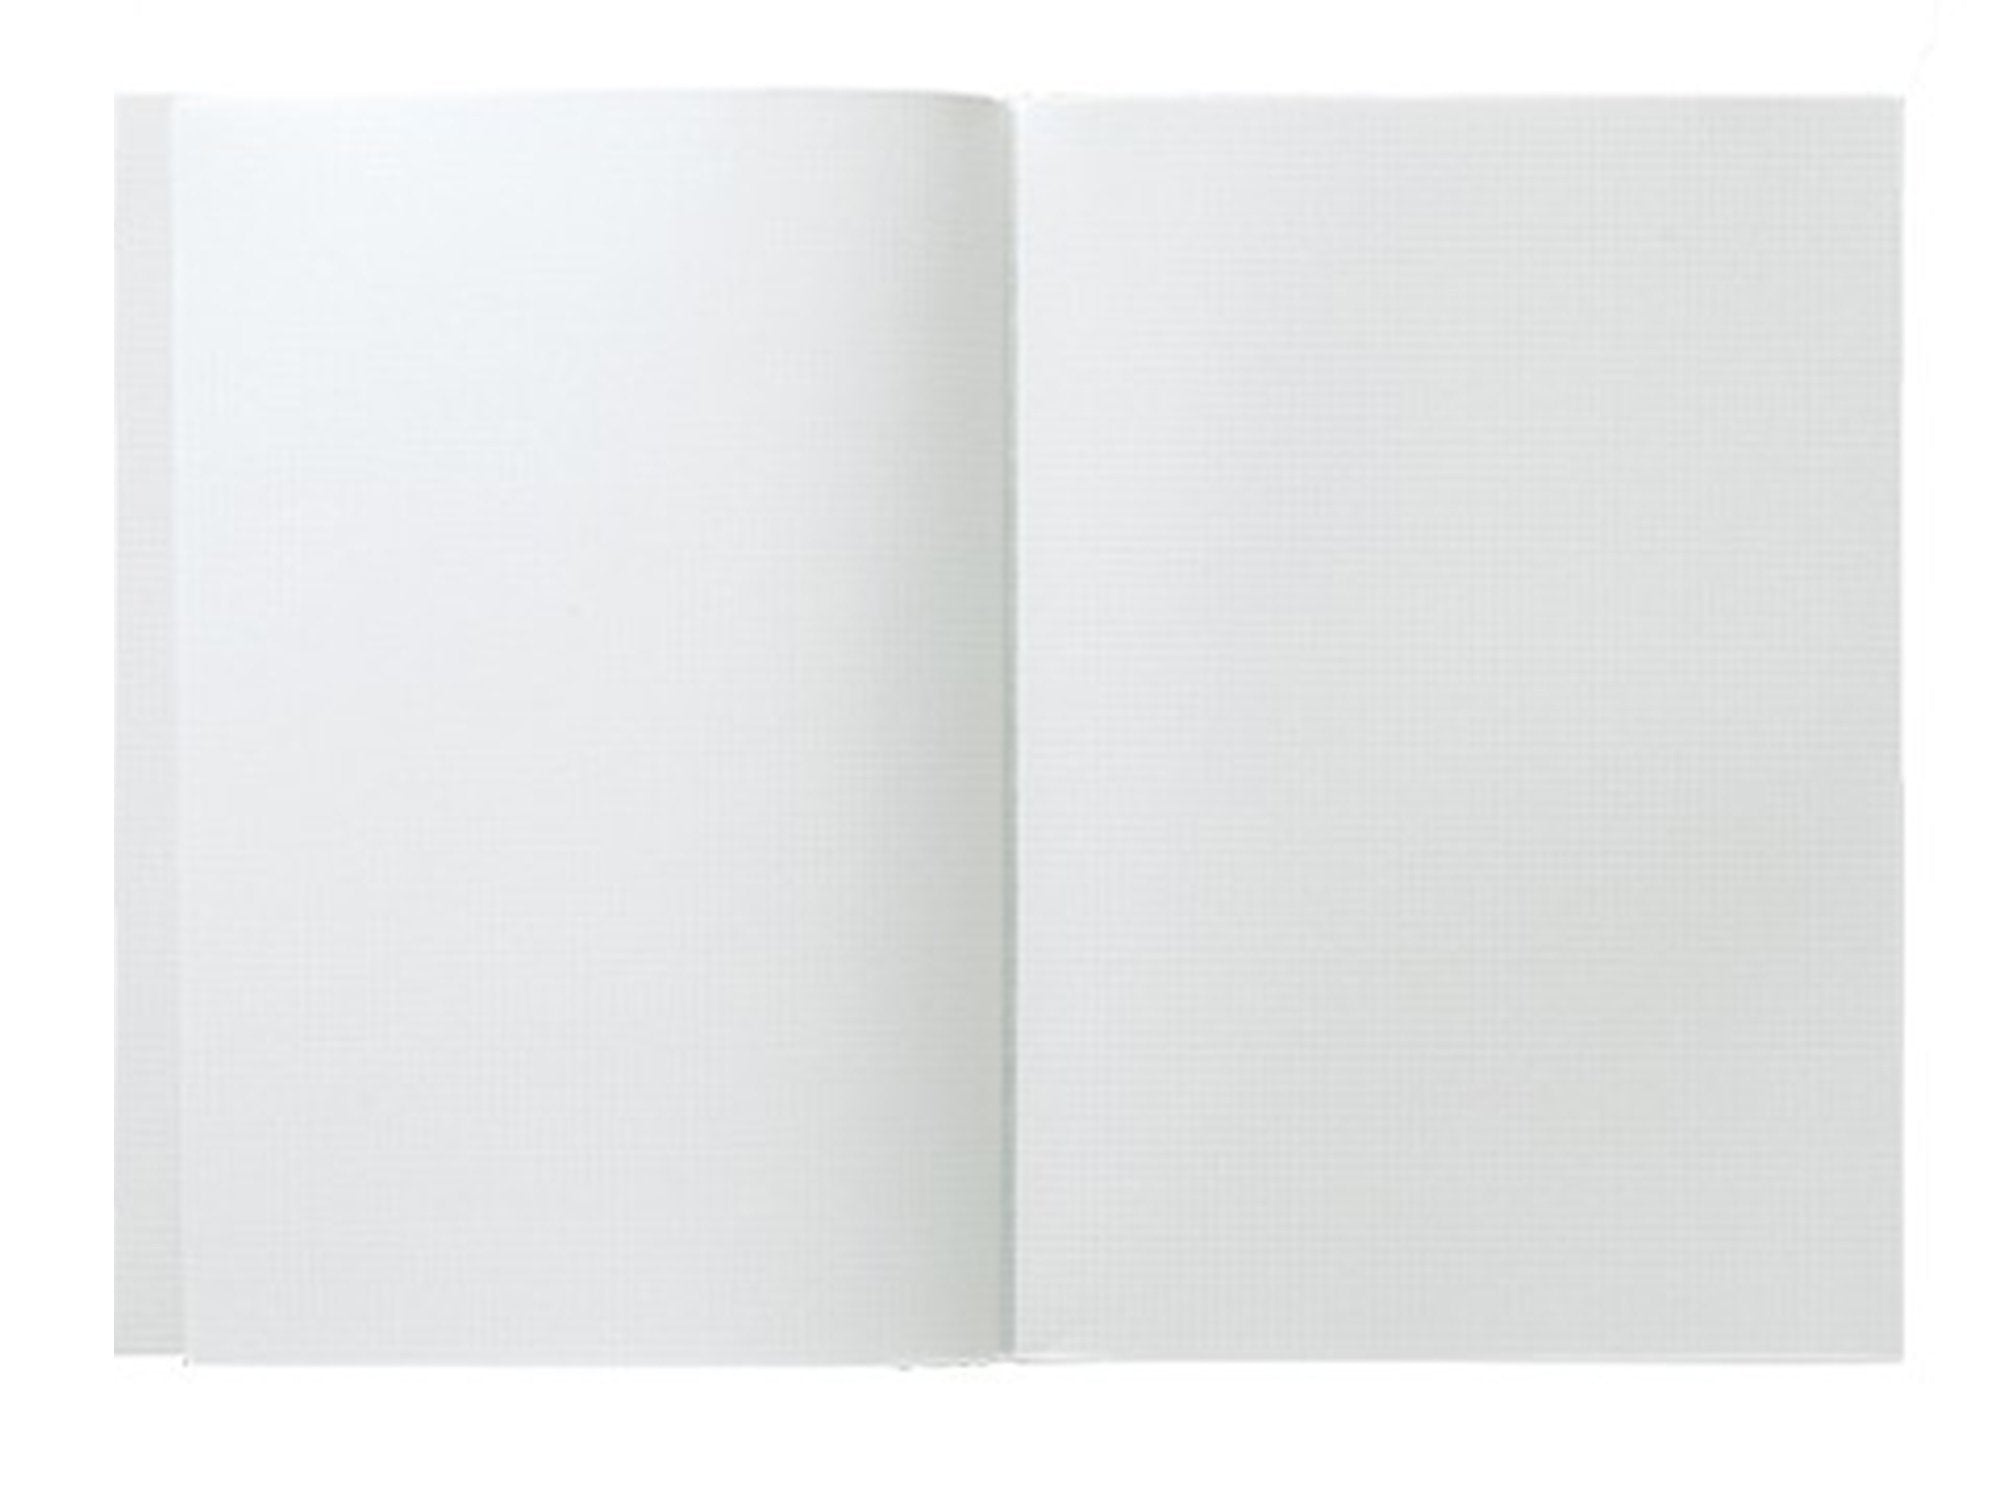 Kleid Tiny Grid Notes Notebook - B6 - 2 mm Graph - White - Cream Paper